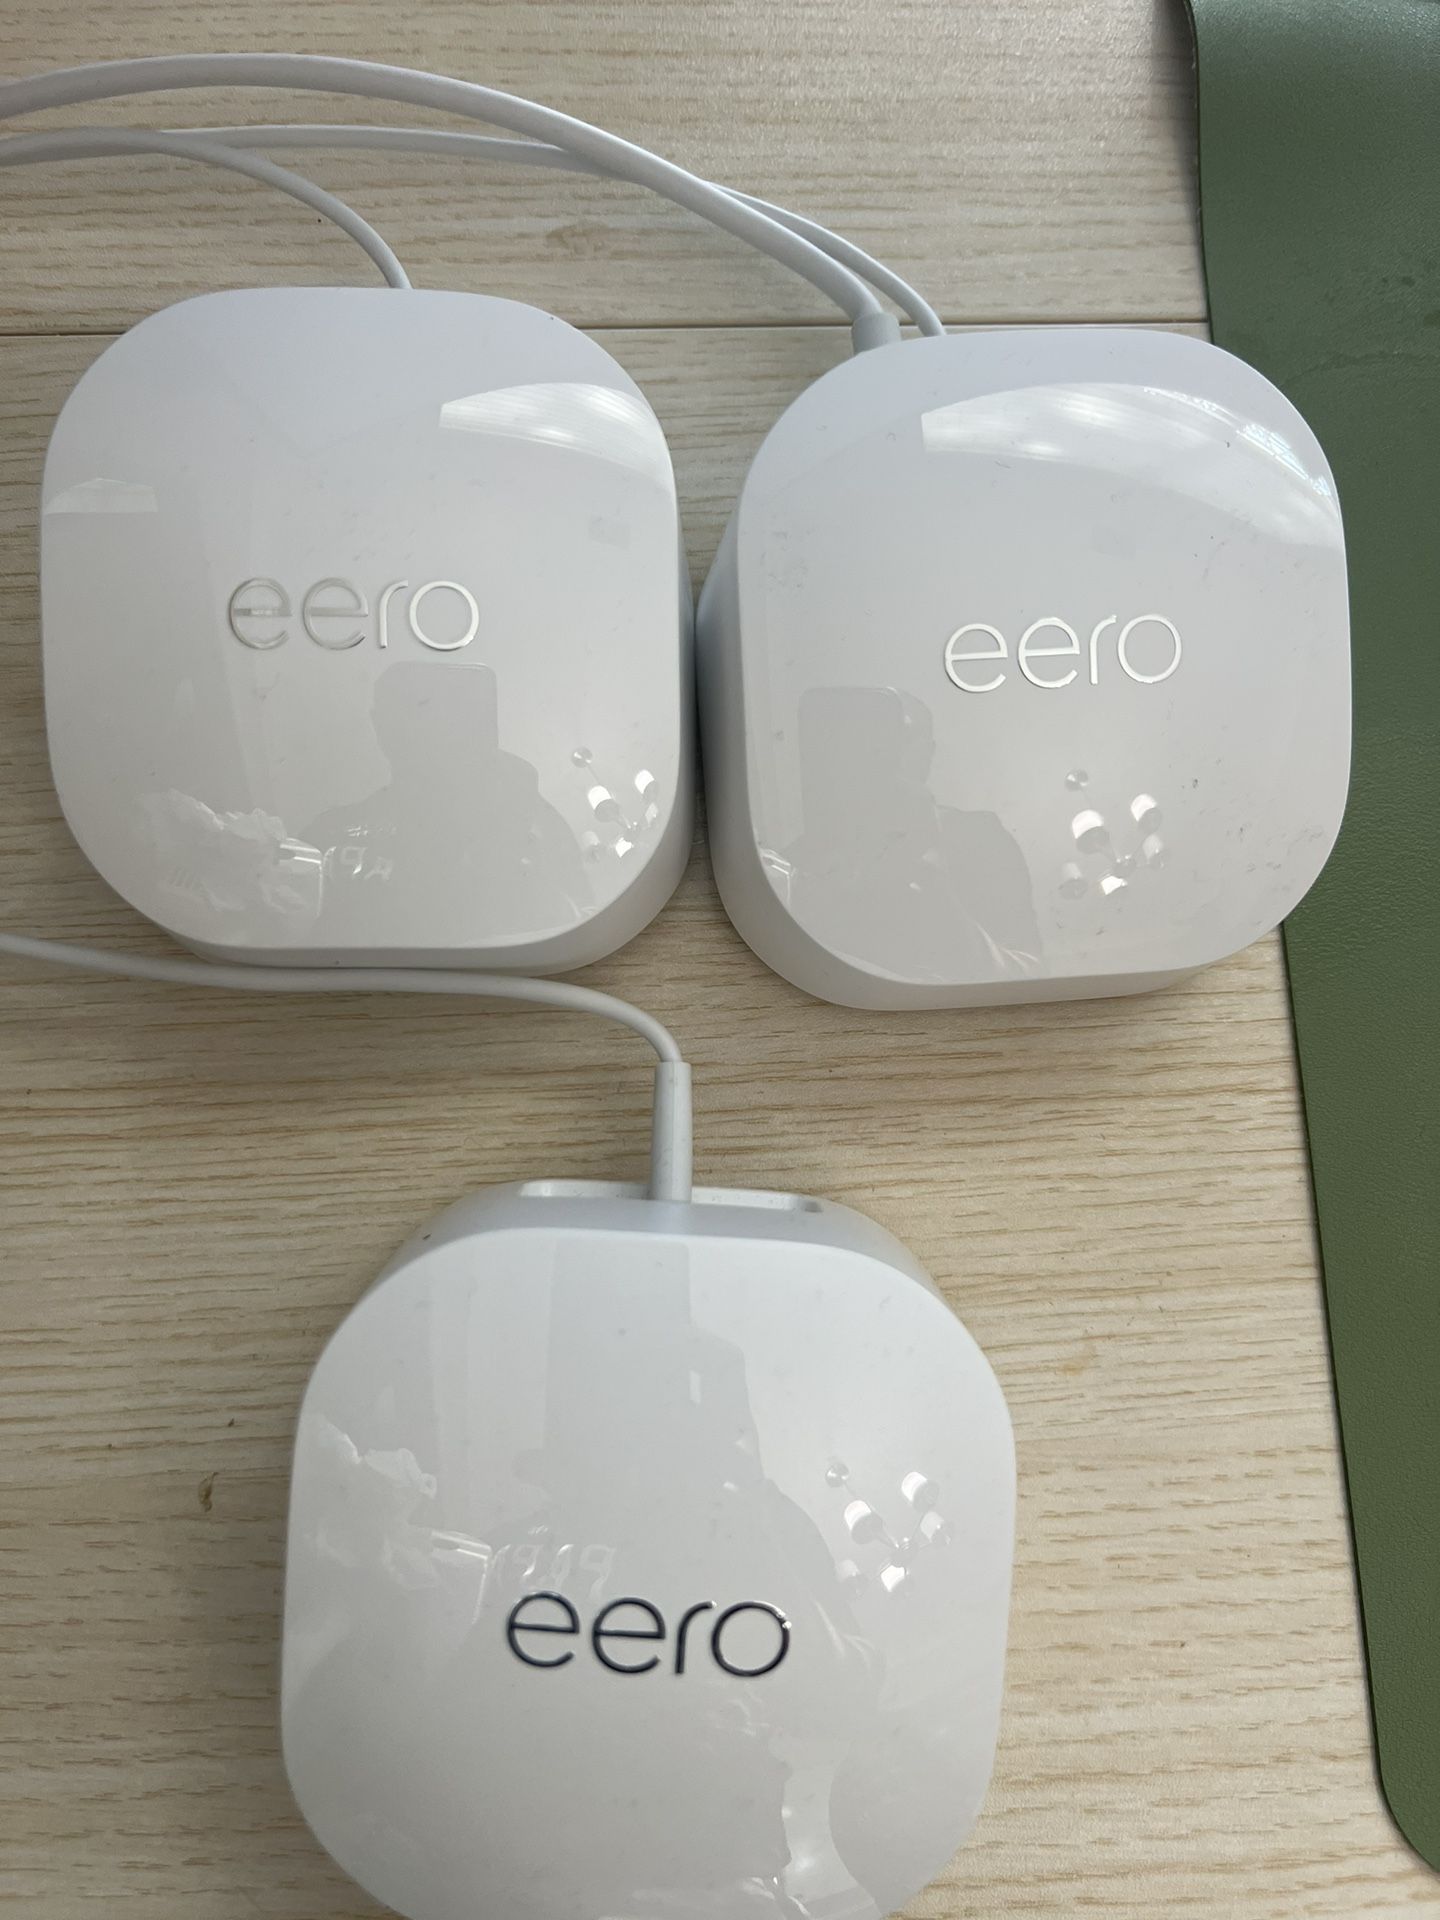 Eero 6+ mesh Wi-Fi router / Extender